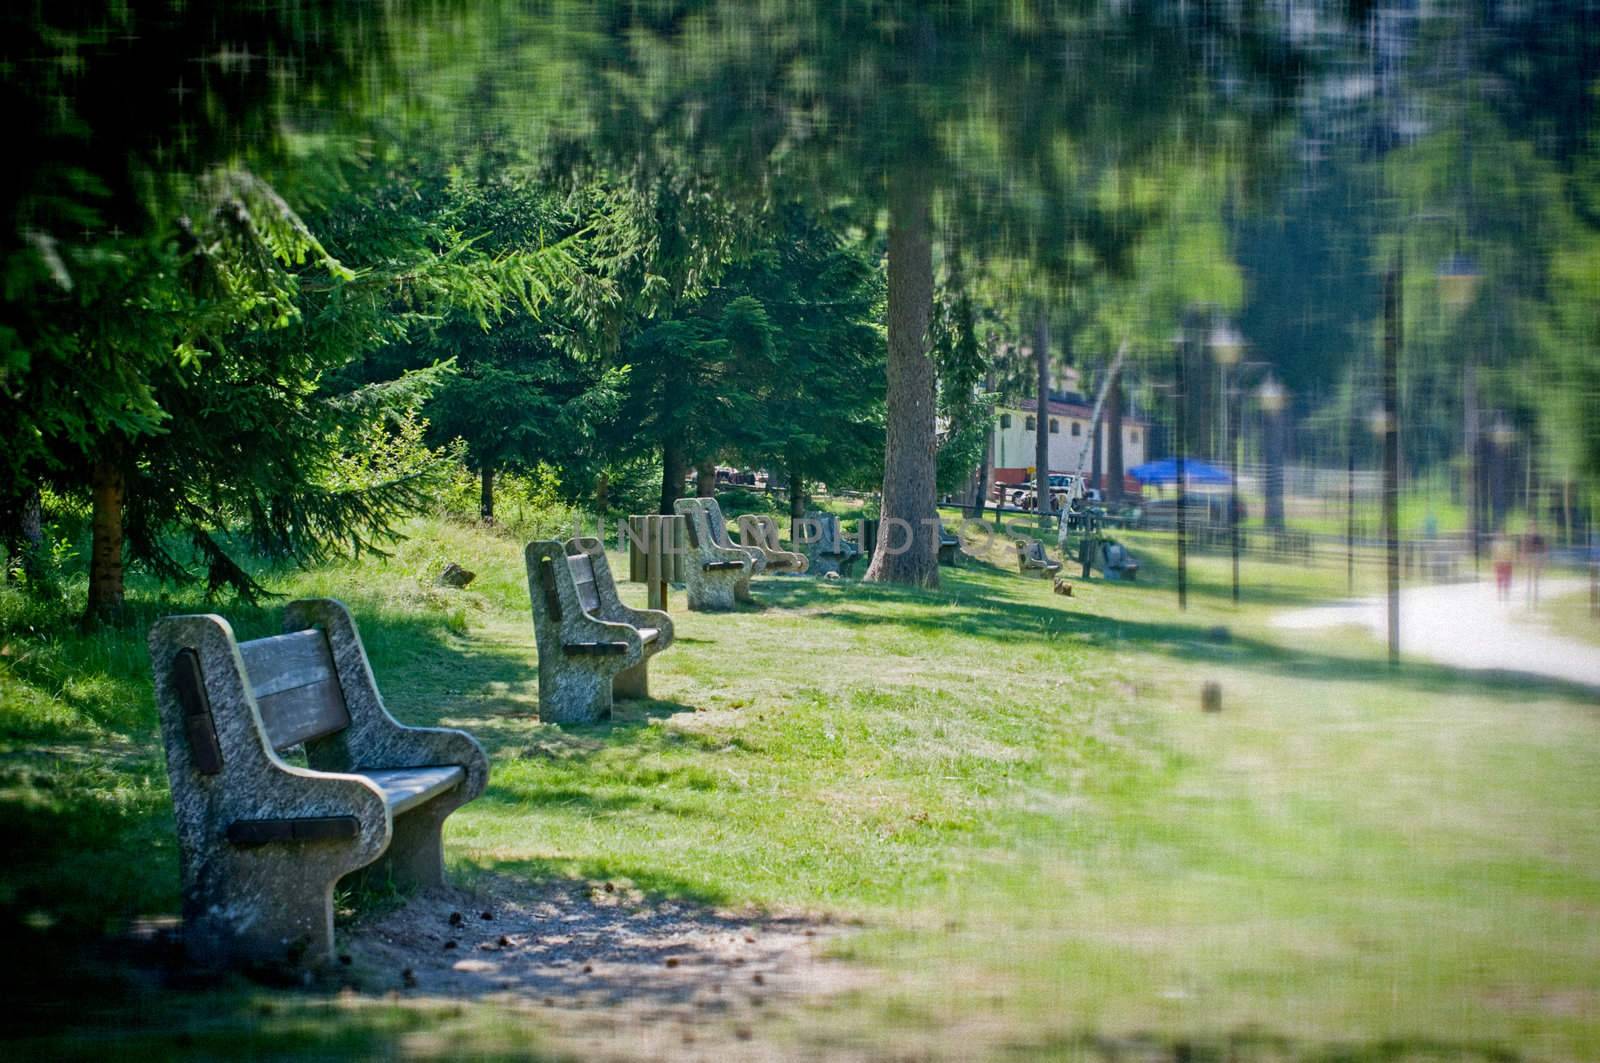 Benches in park with blurred stars filter- Grain intentional